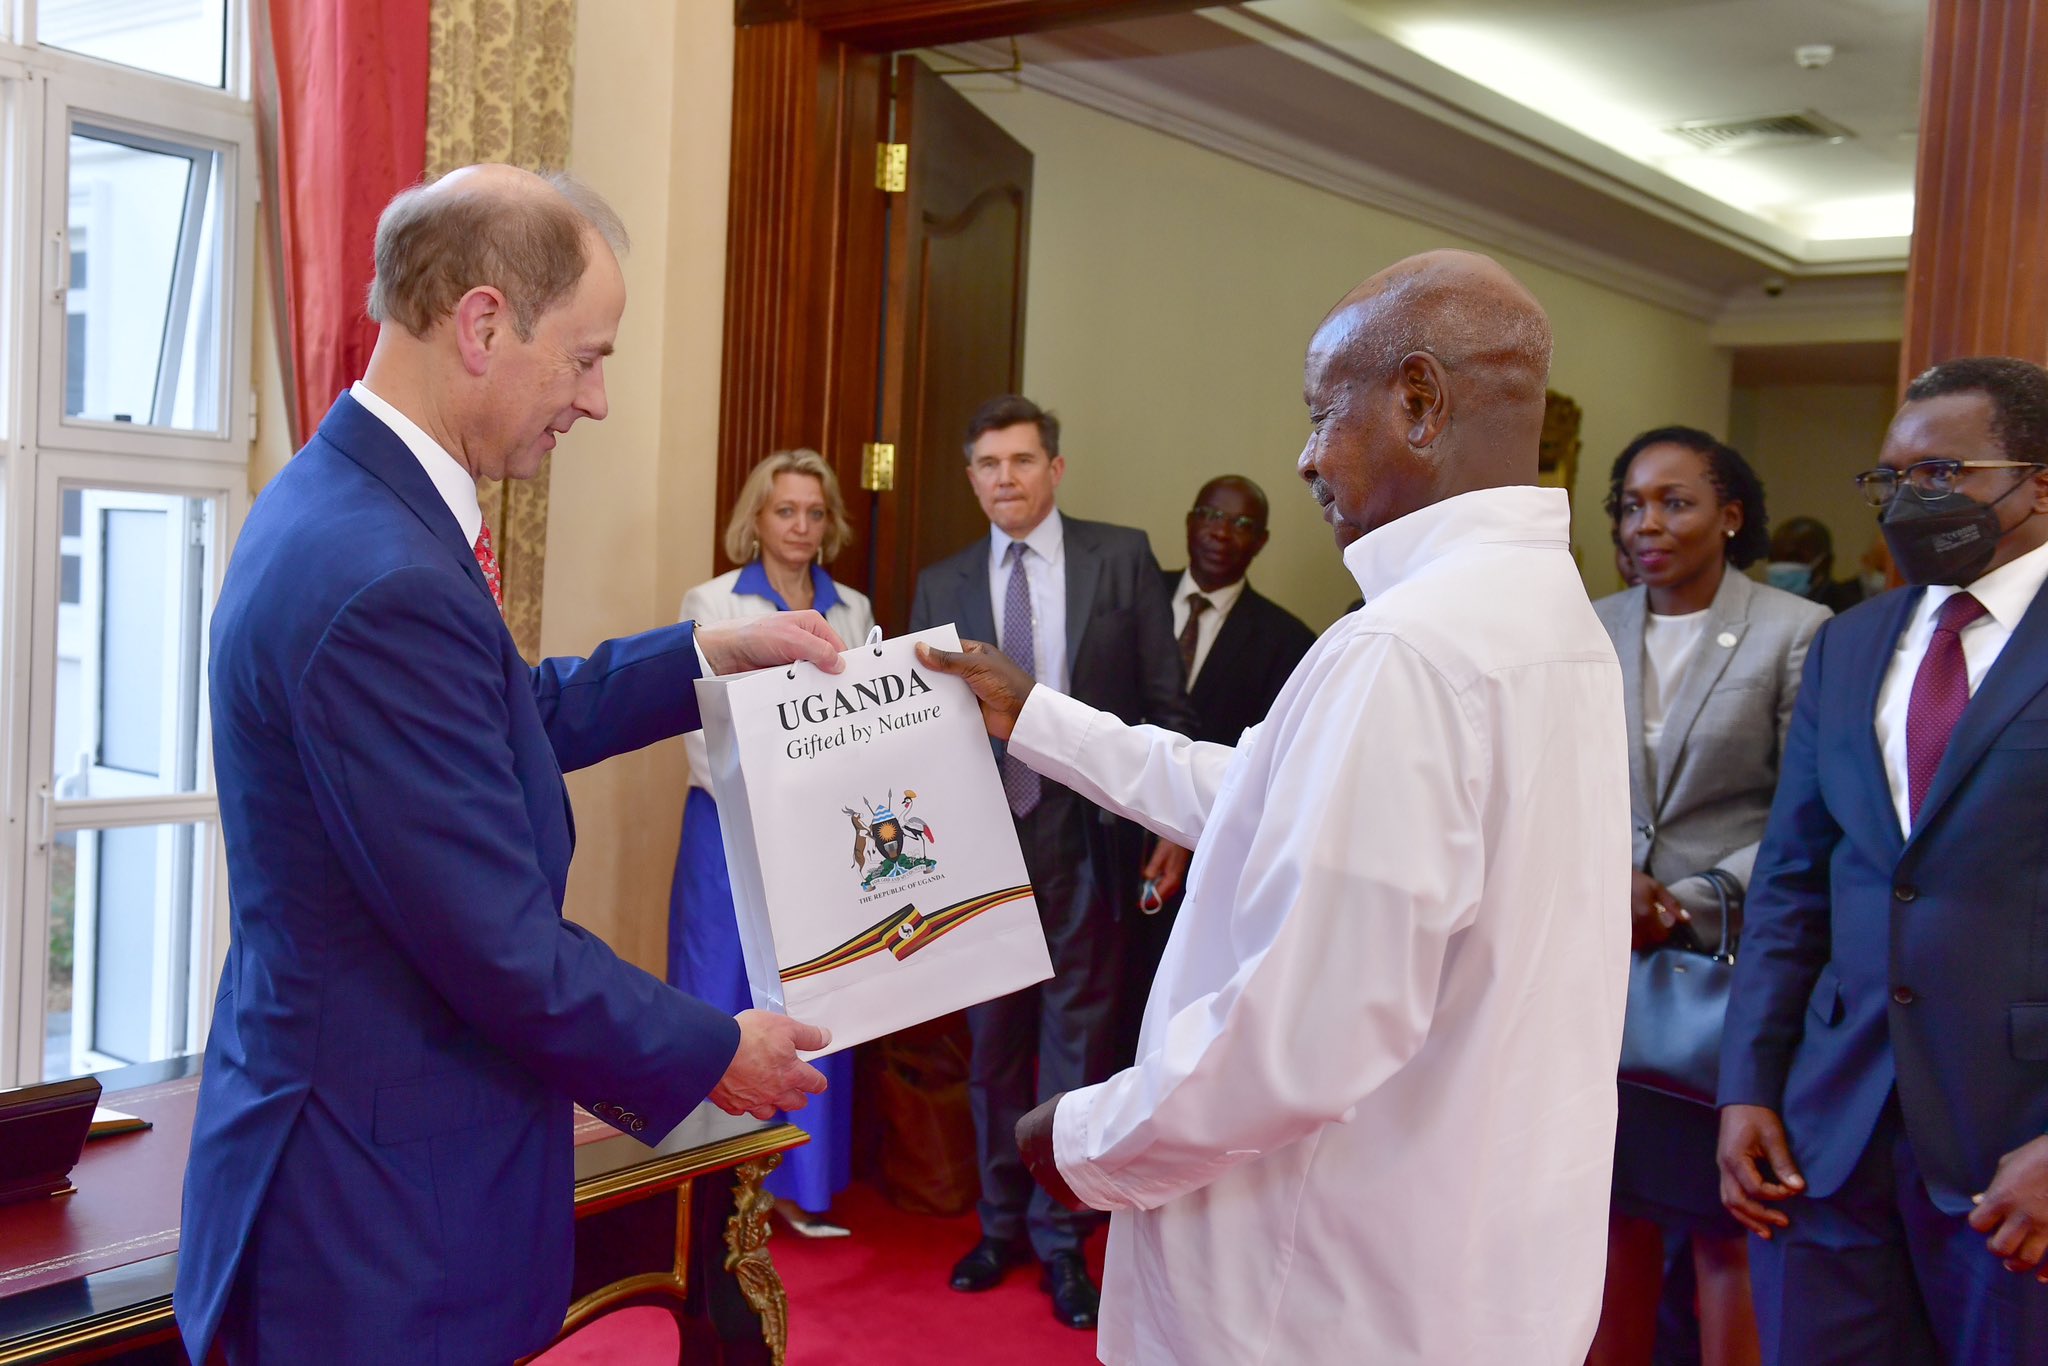 President Museveni Meets with Duke of Edinburgh at State House Entebbe